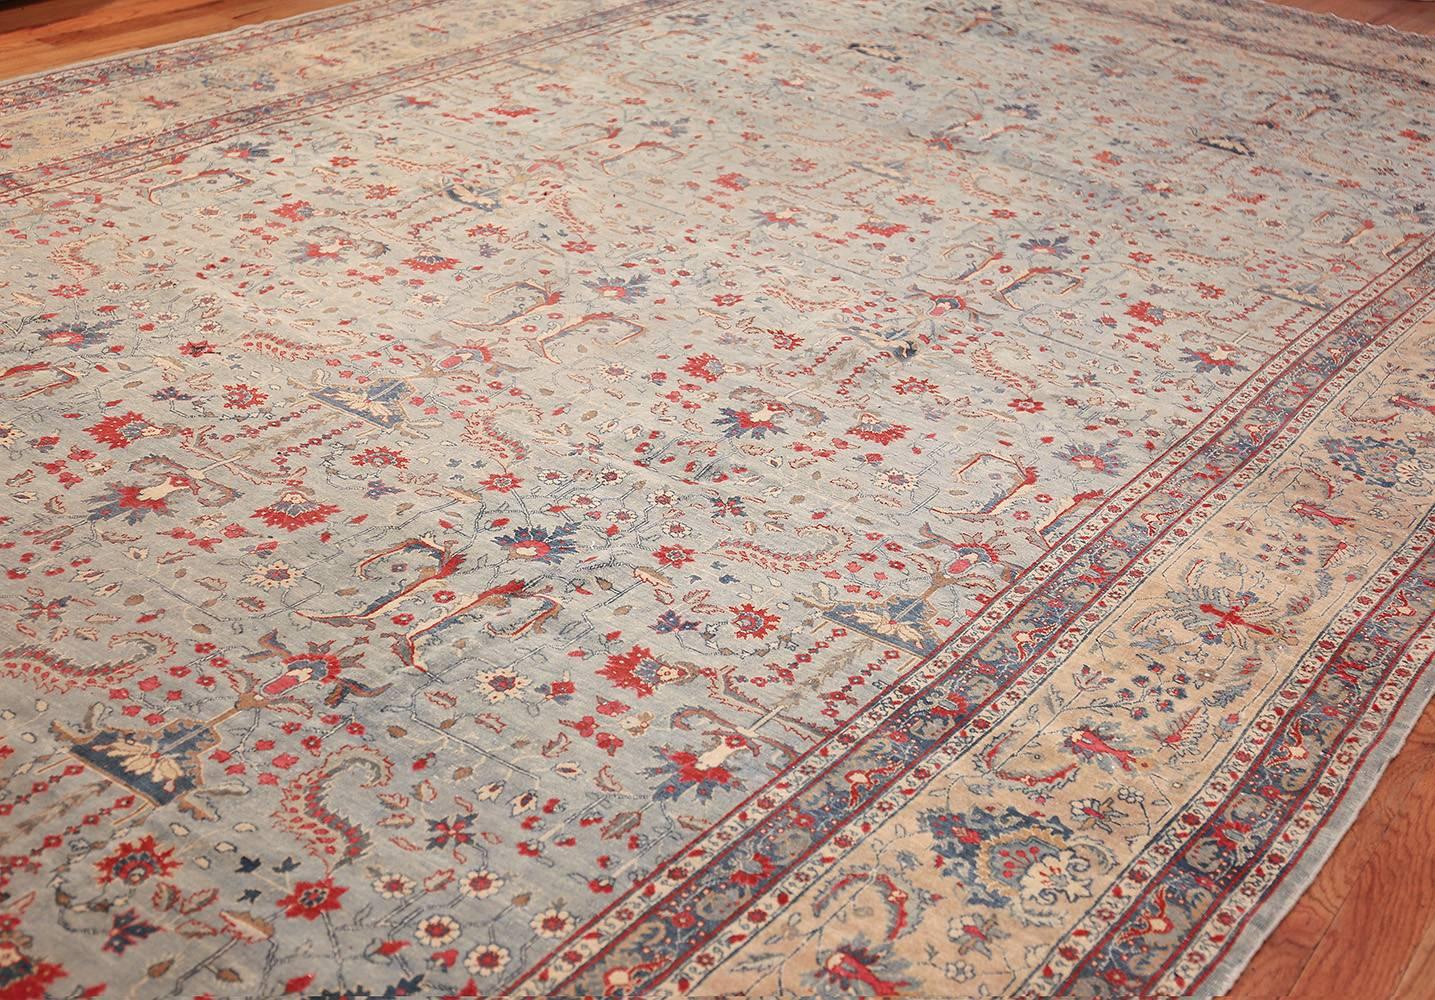 Hand-Knotted Beautiful and Extremely Decorative Light Blue Antique Persian Tabriz Rug